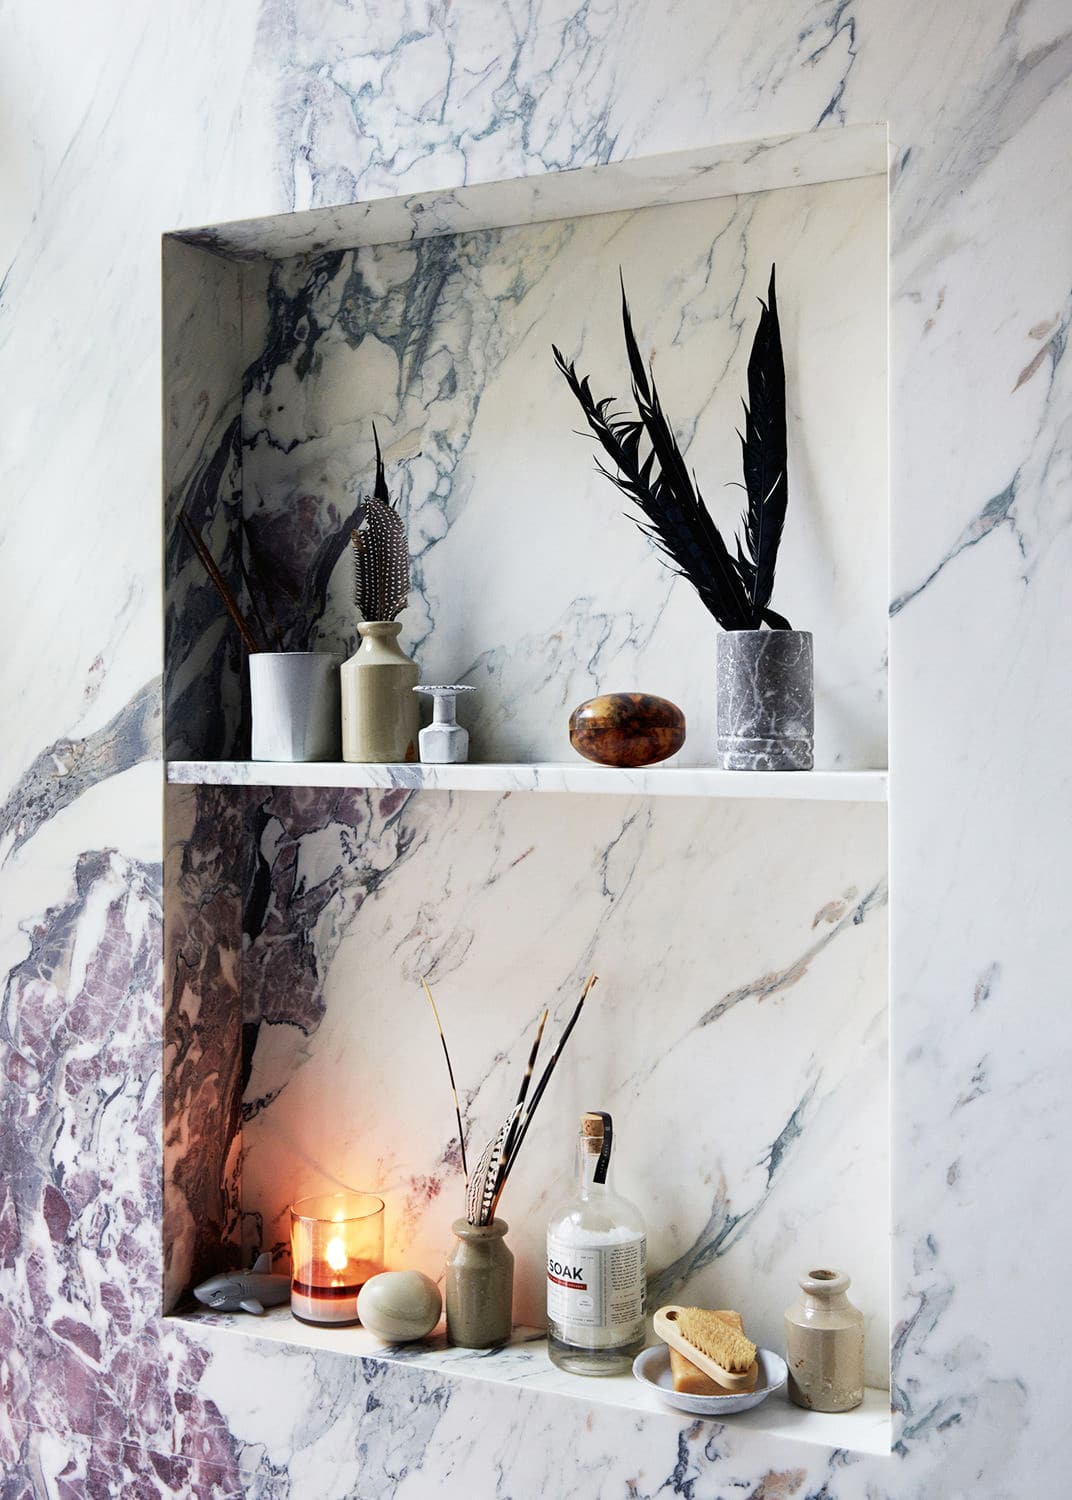 built-in marble shelving in the bath | jenna lyons house tour on coco kelley